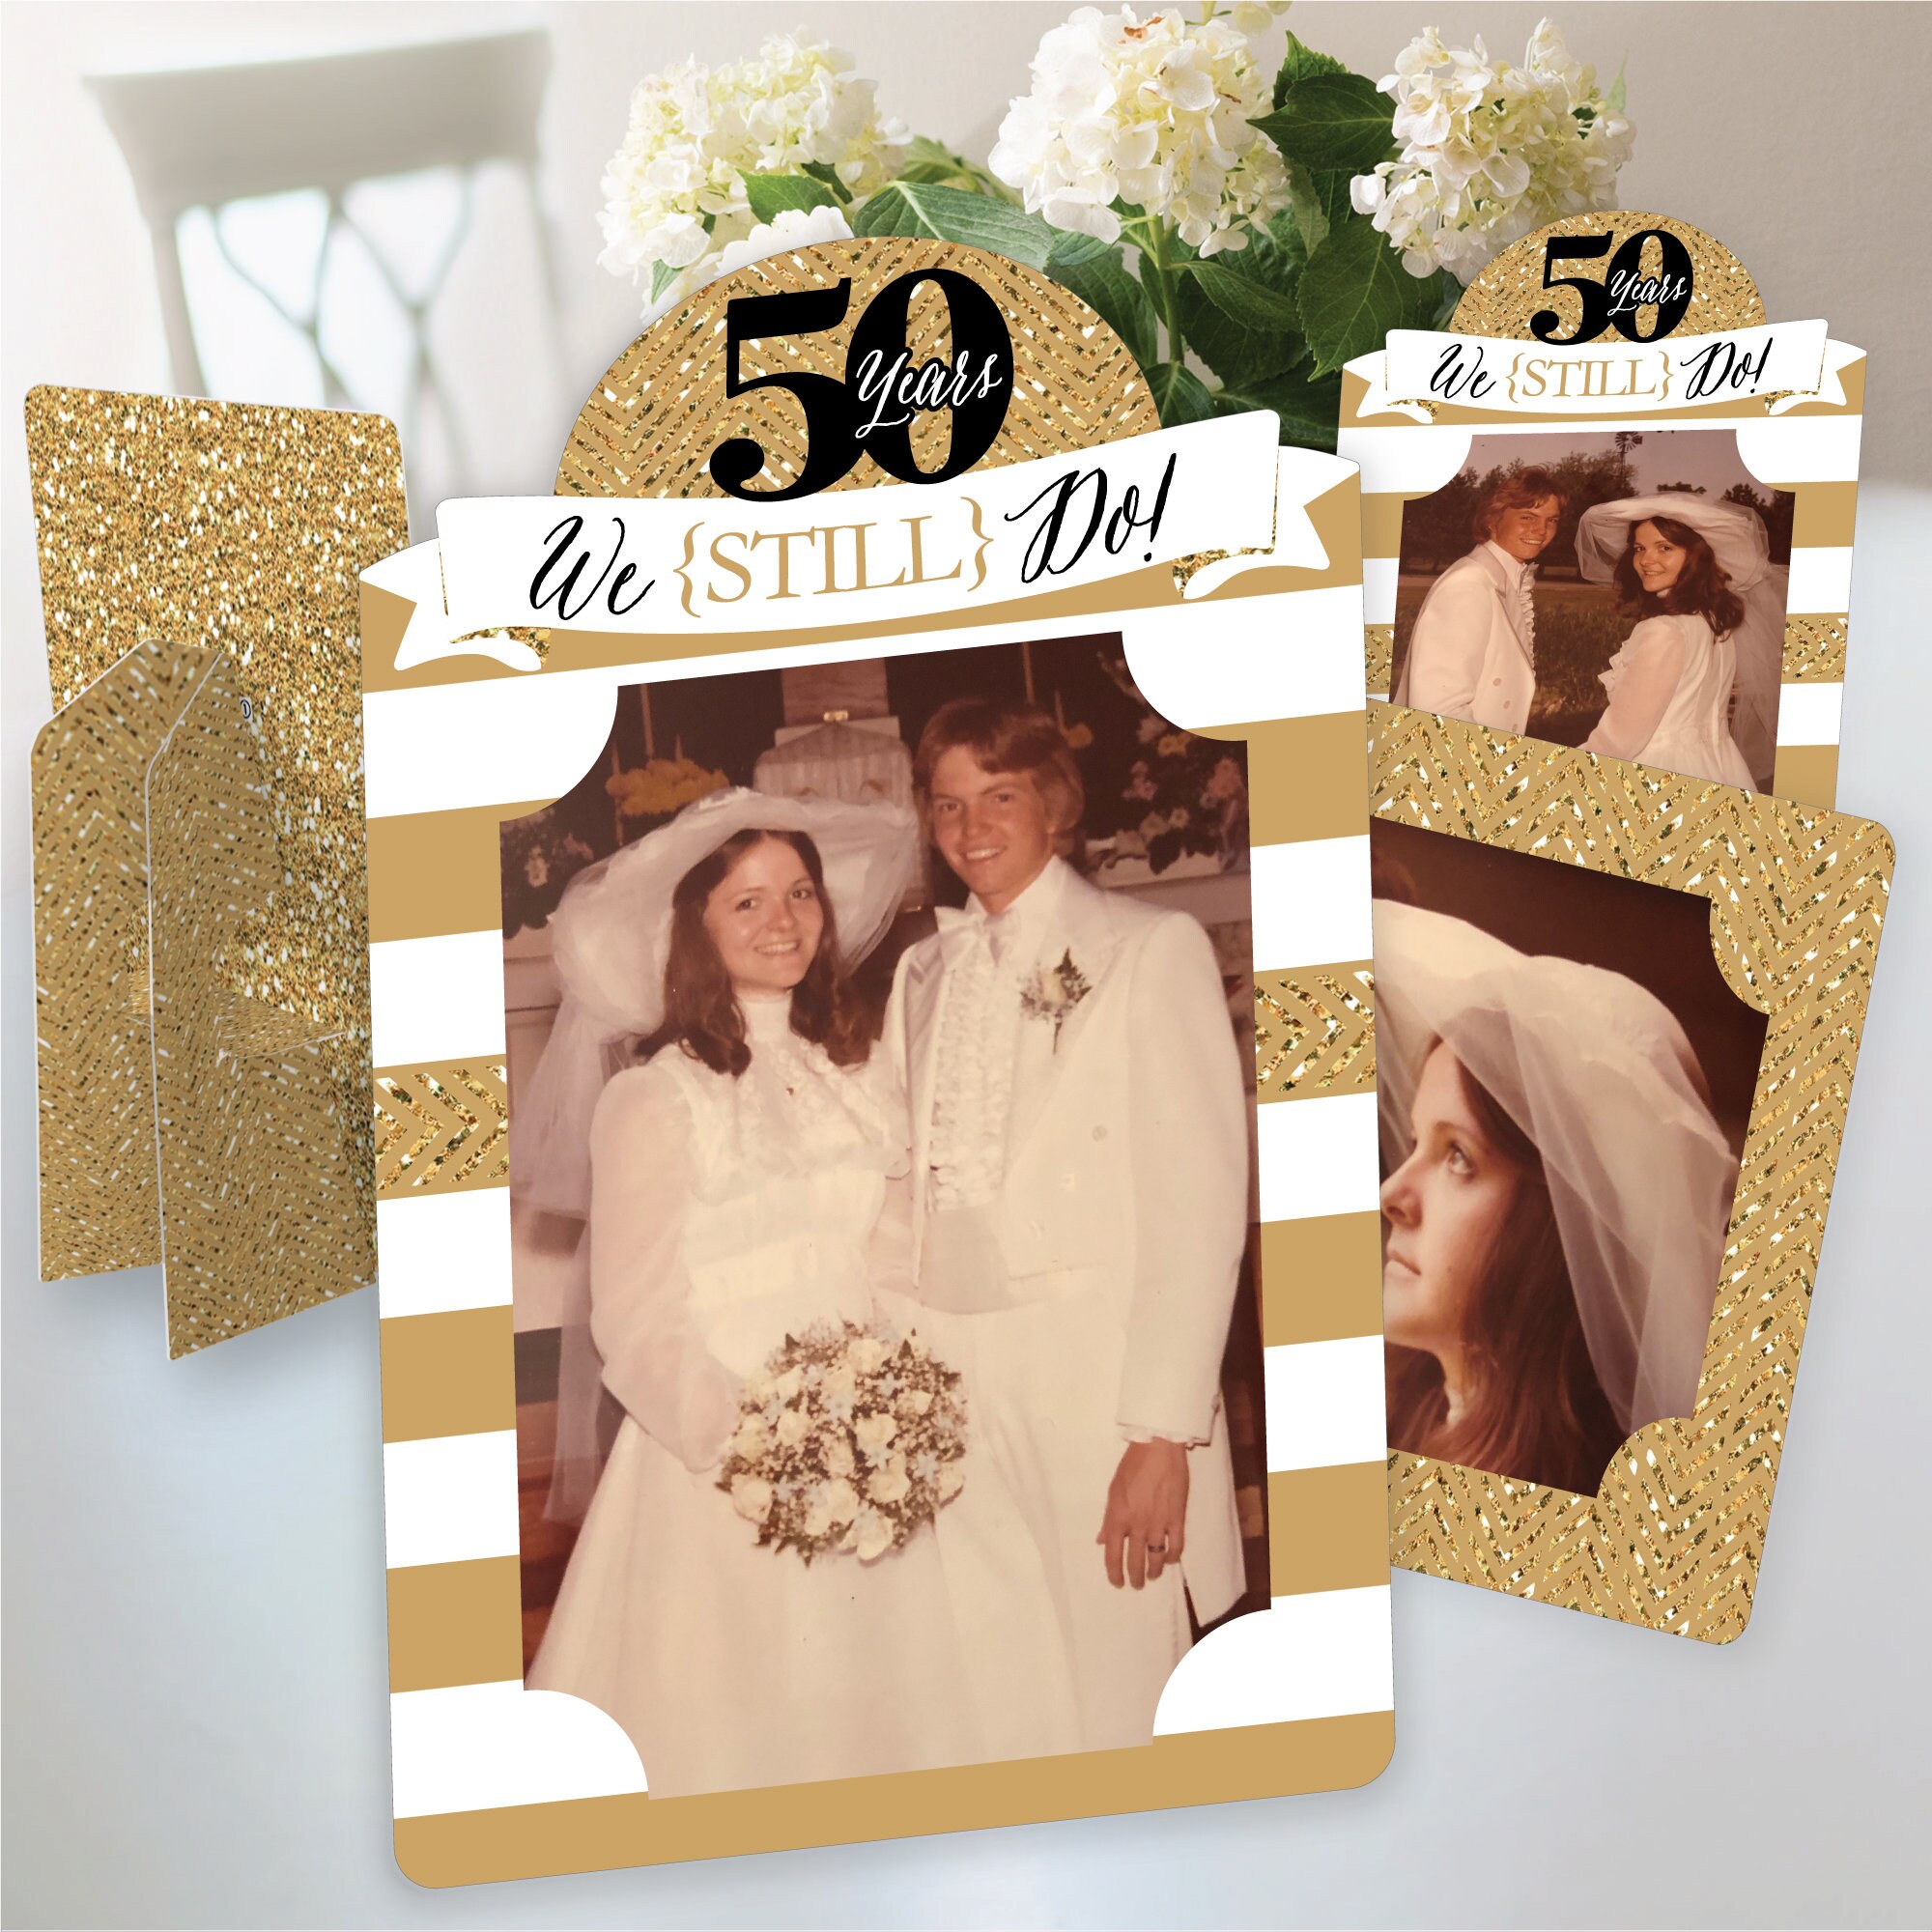 50 Pack Cardboard Picture Frames, 4x6 DIY Photo Hanging Kit with